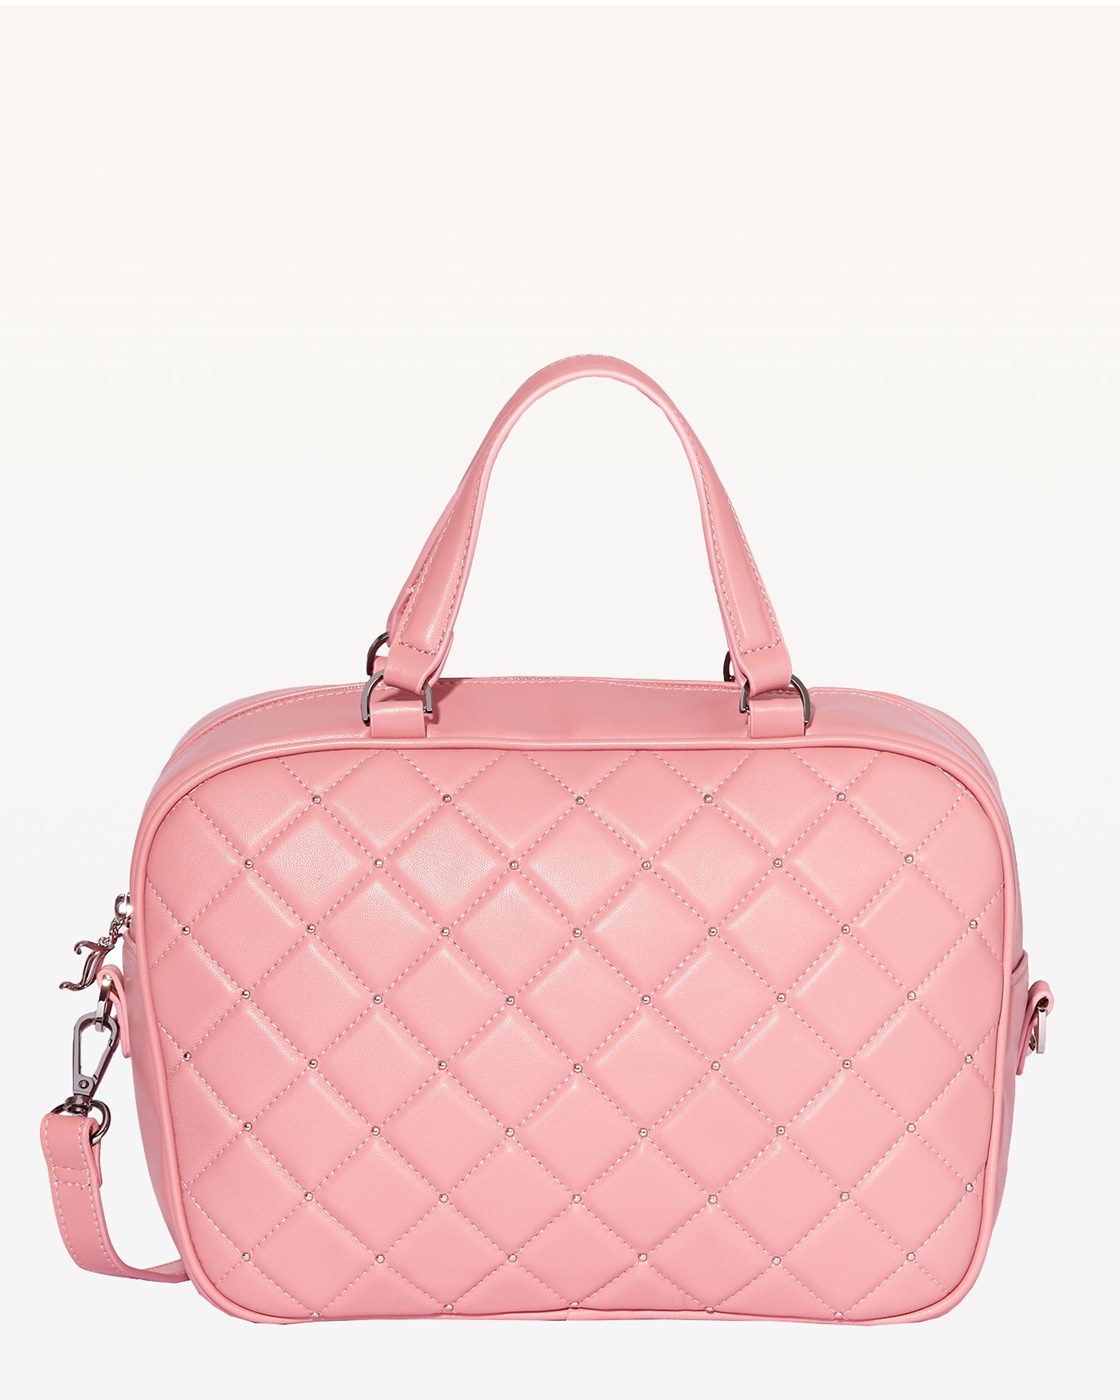 Juicy Couture Norwood Blush Leather Crossbody Bag